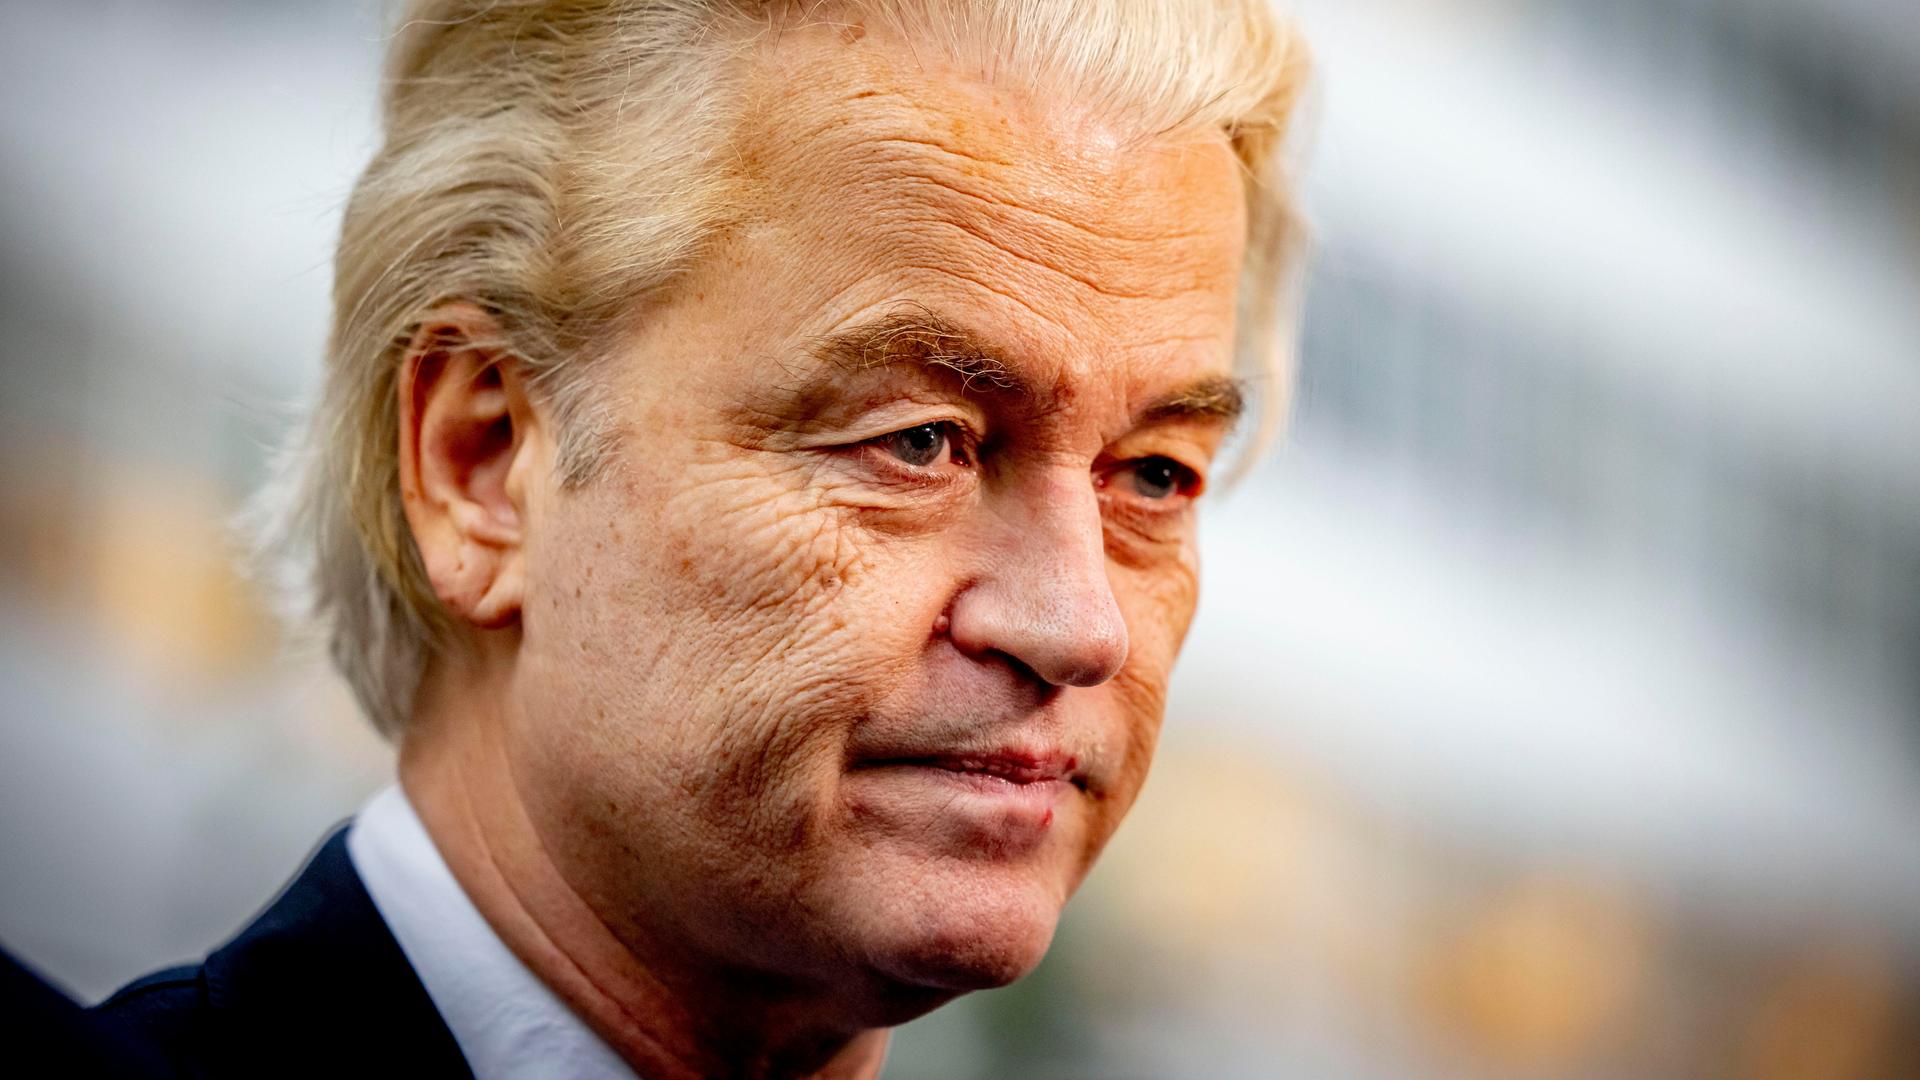 THE HAGUE - Party leader of the Party for Freedom (PVV) Geert Wilders casts his vote for the House of Representatives elections netherlands . robin utrecht